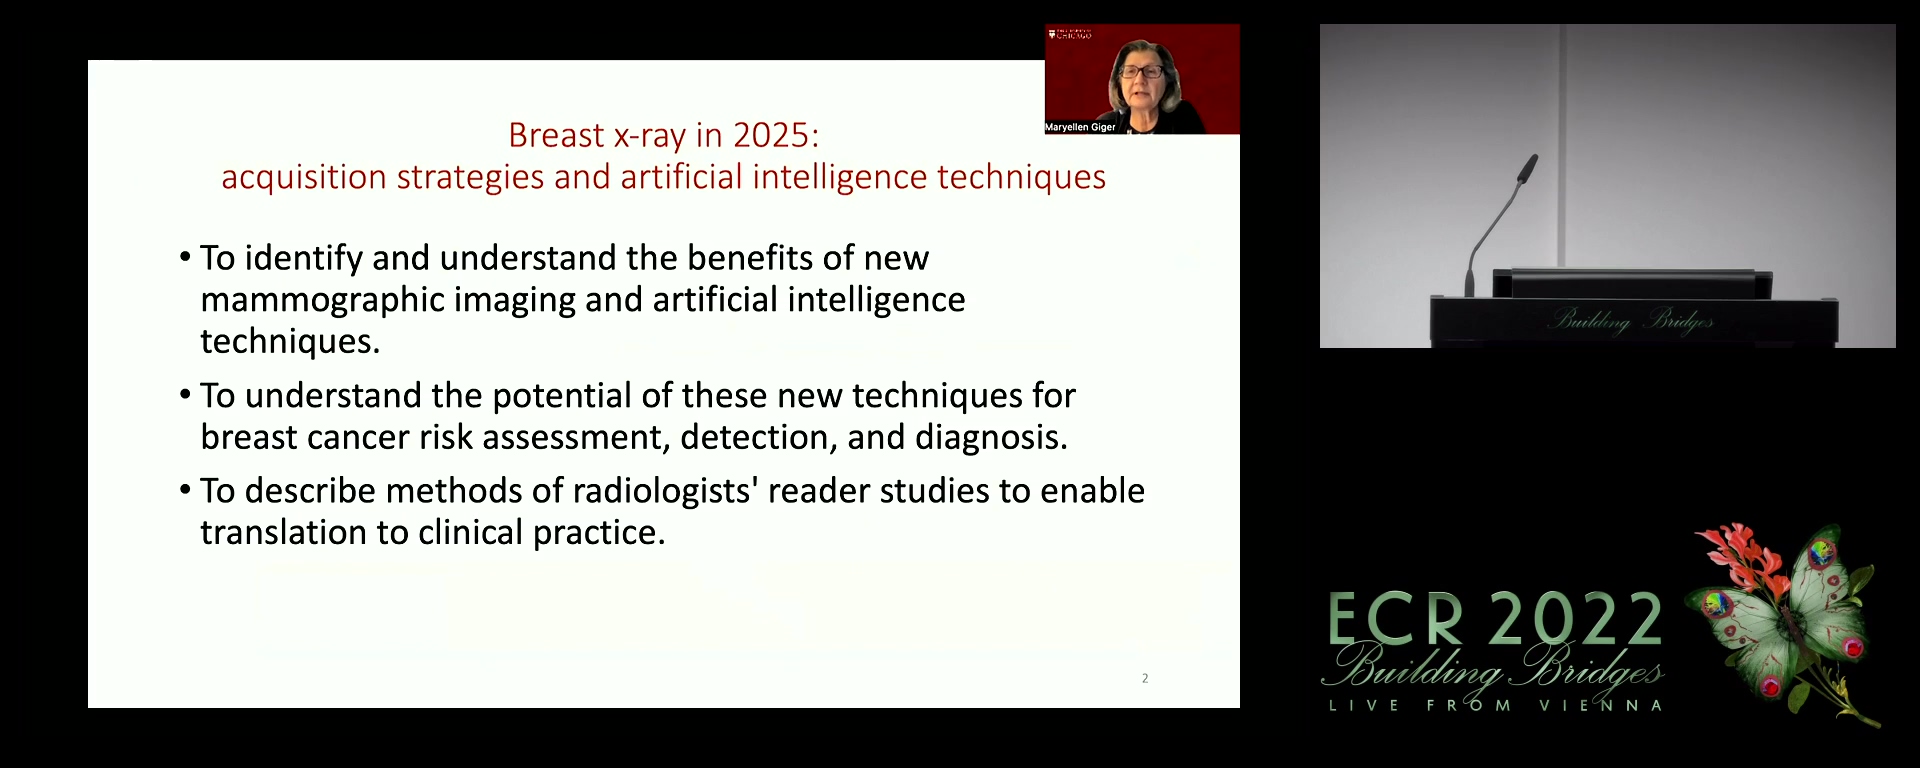 Breast x-ray in 2025: acquisition strategies and artificial intelligence techniques